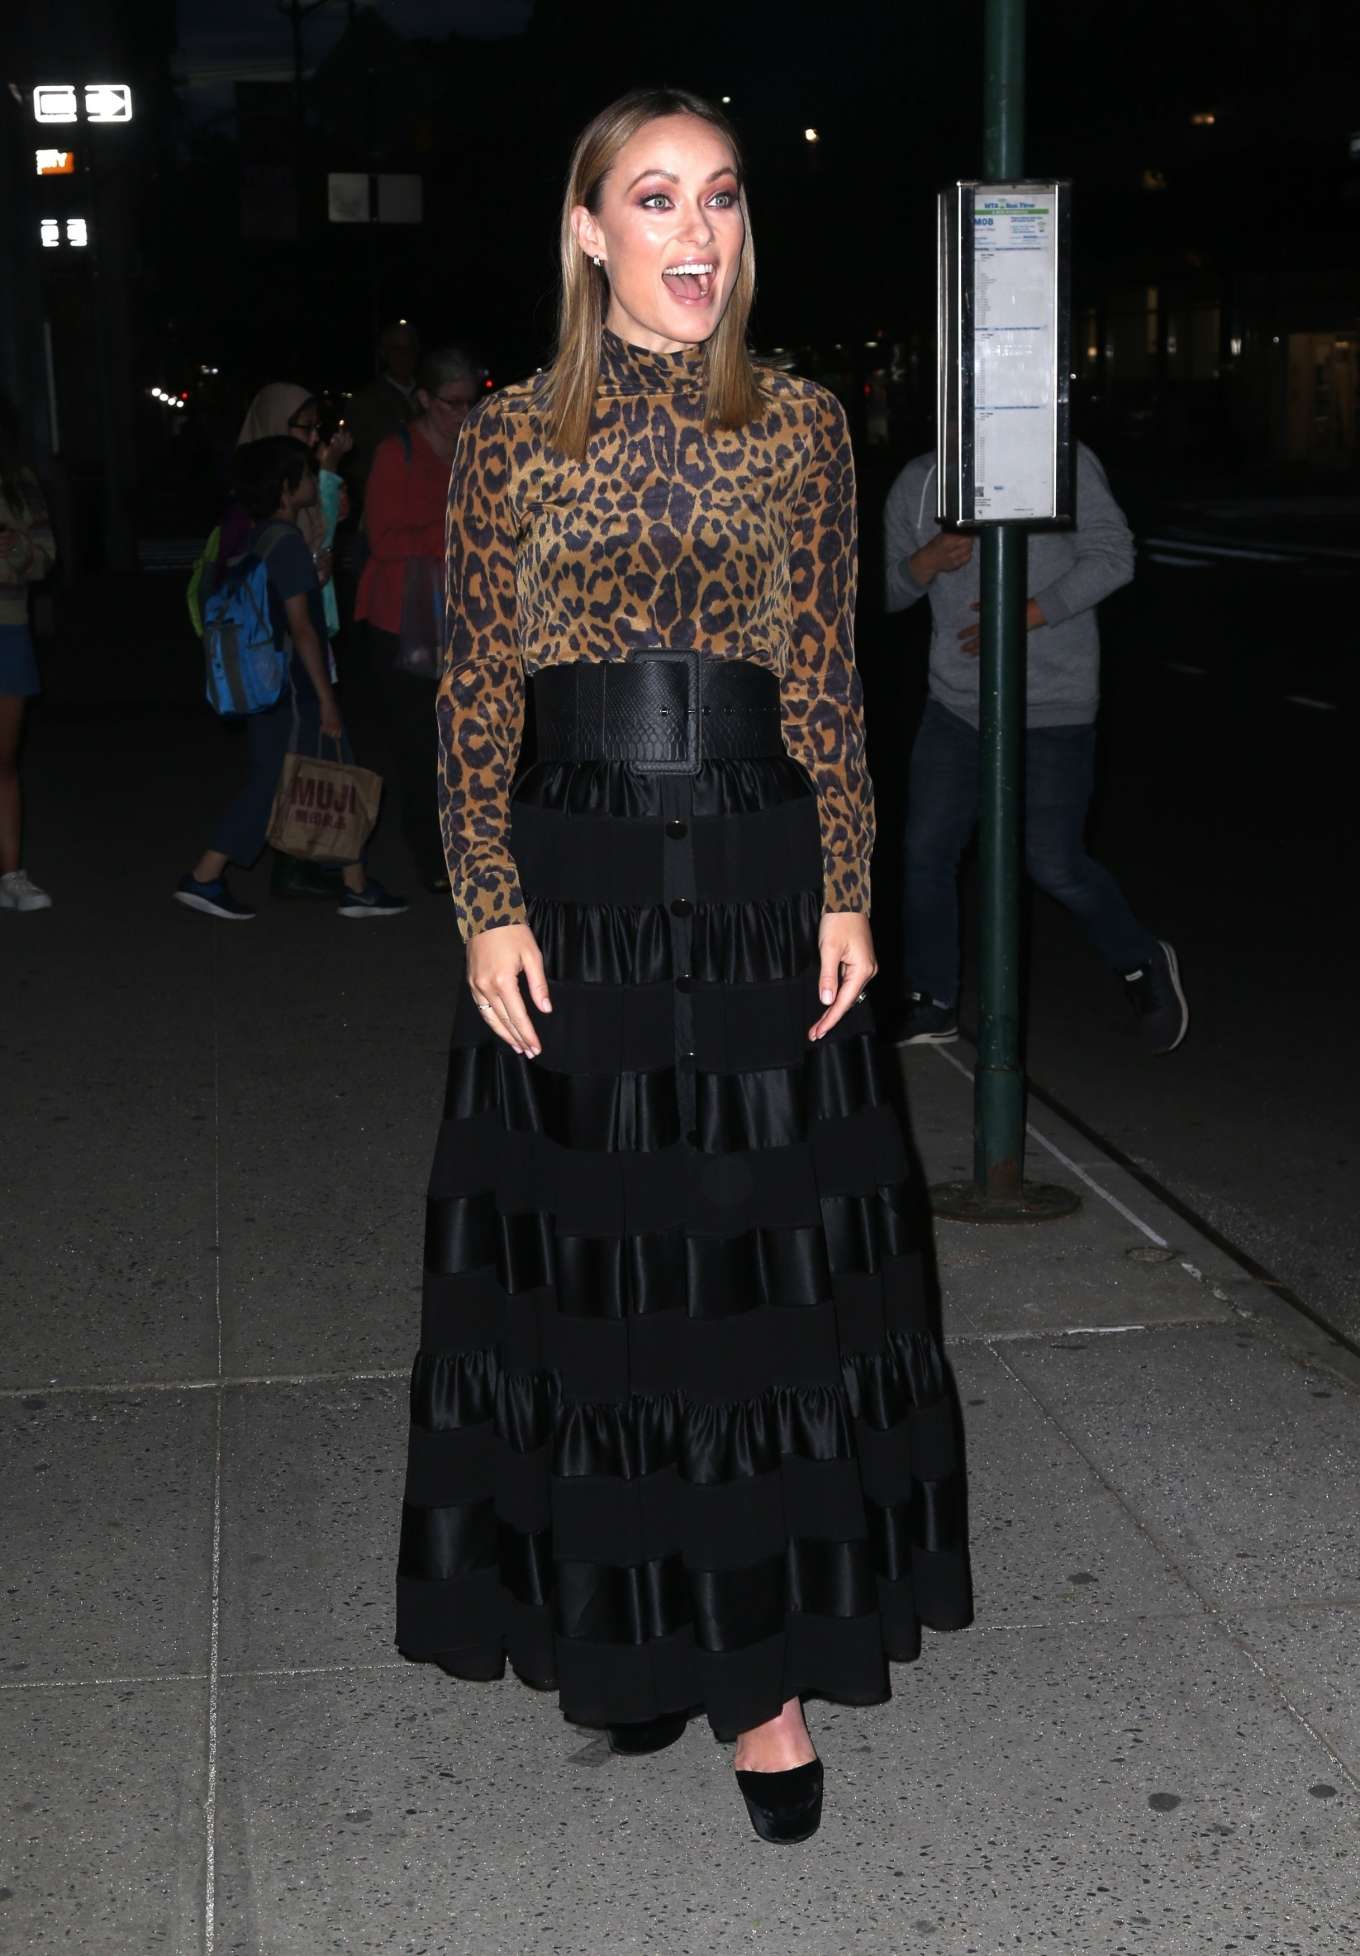 Olivia Wilde in Animal Print Top â€“ Night out in NYC